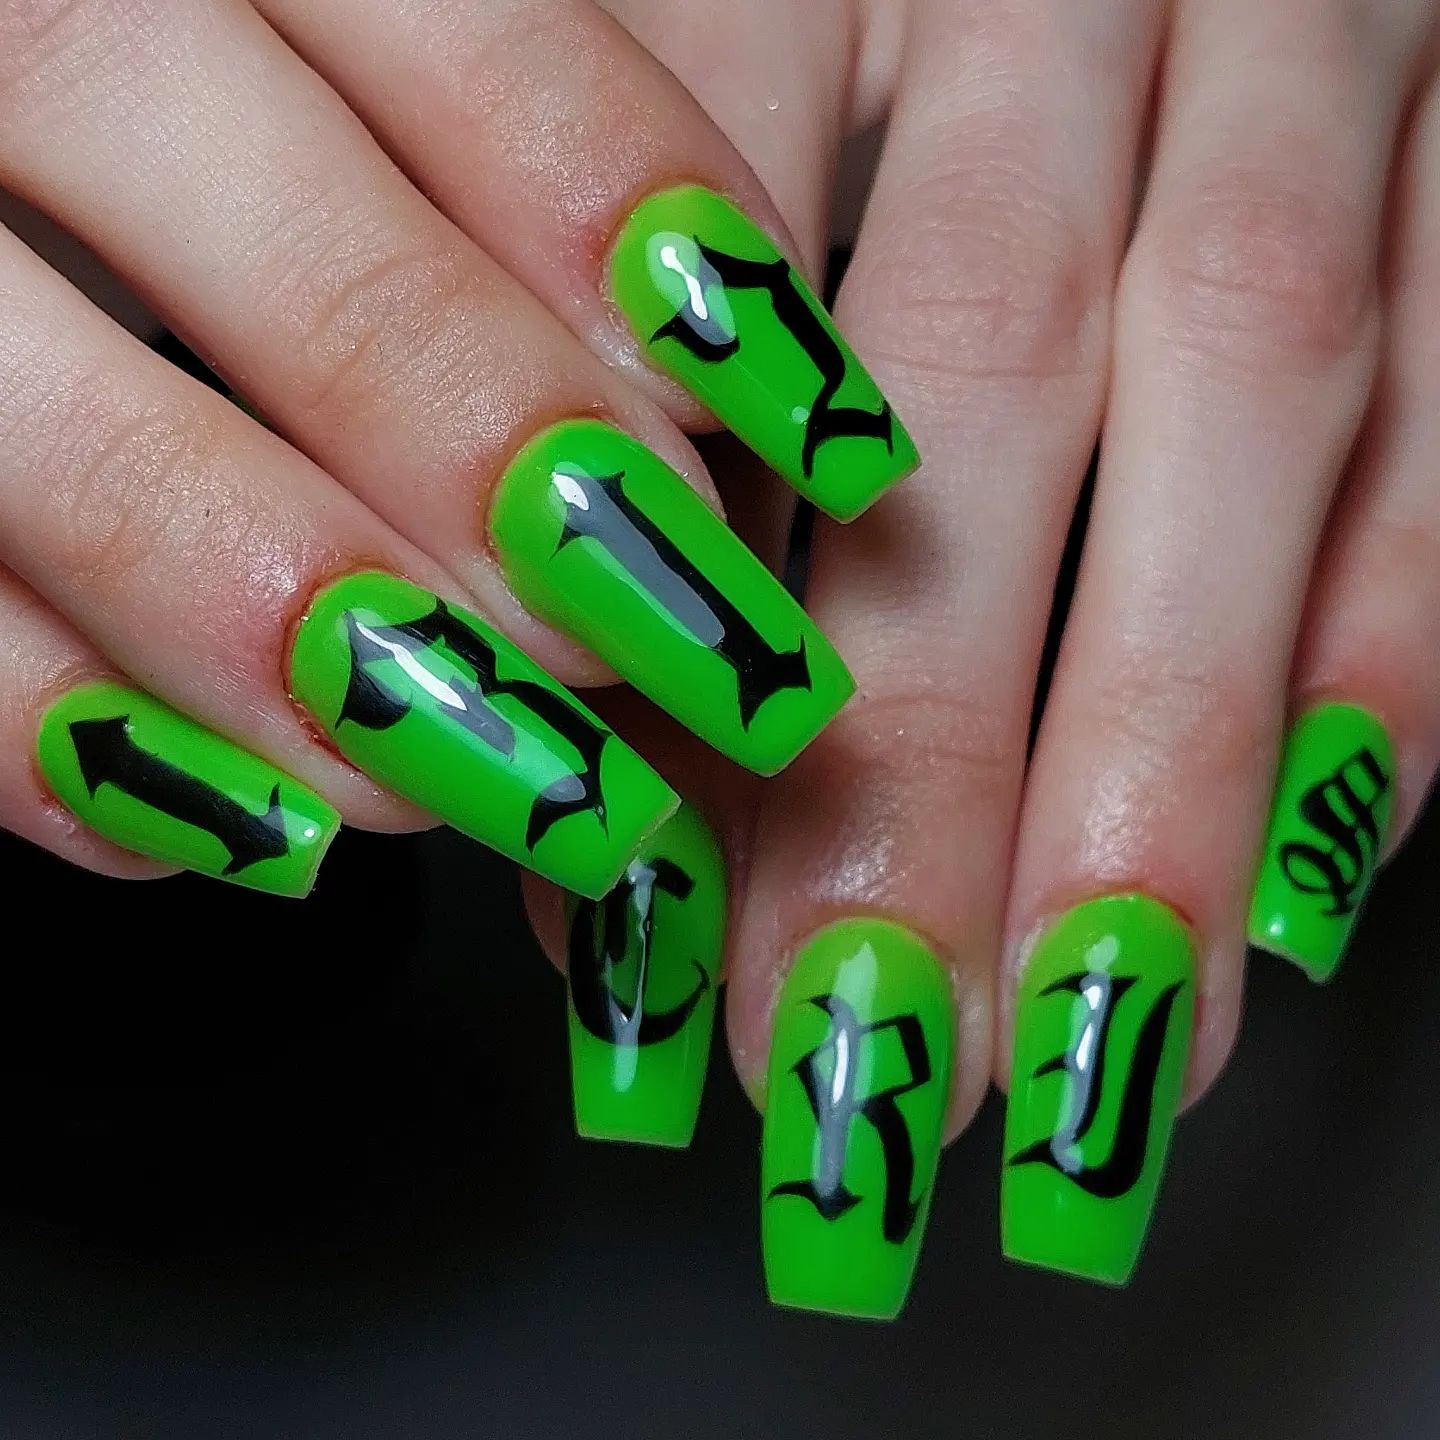 Goth neon green nails